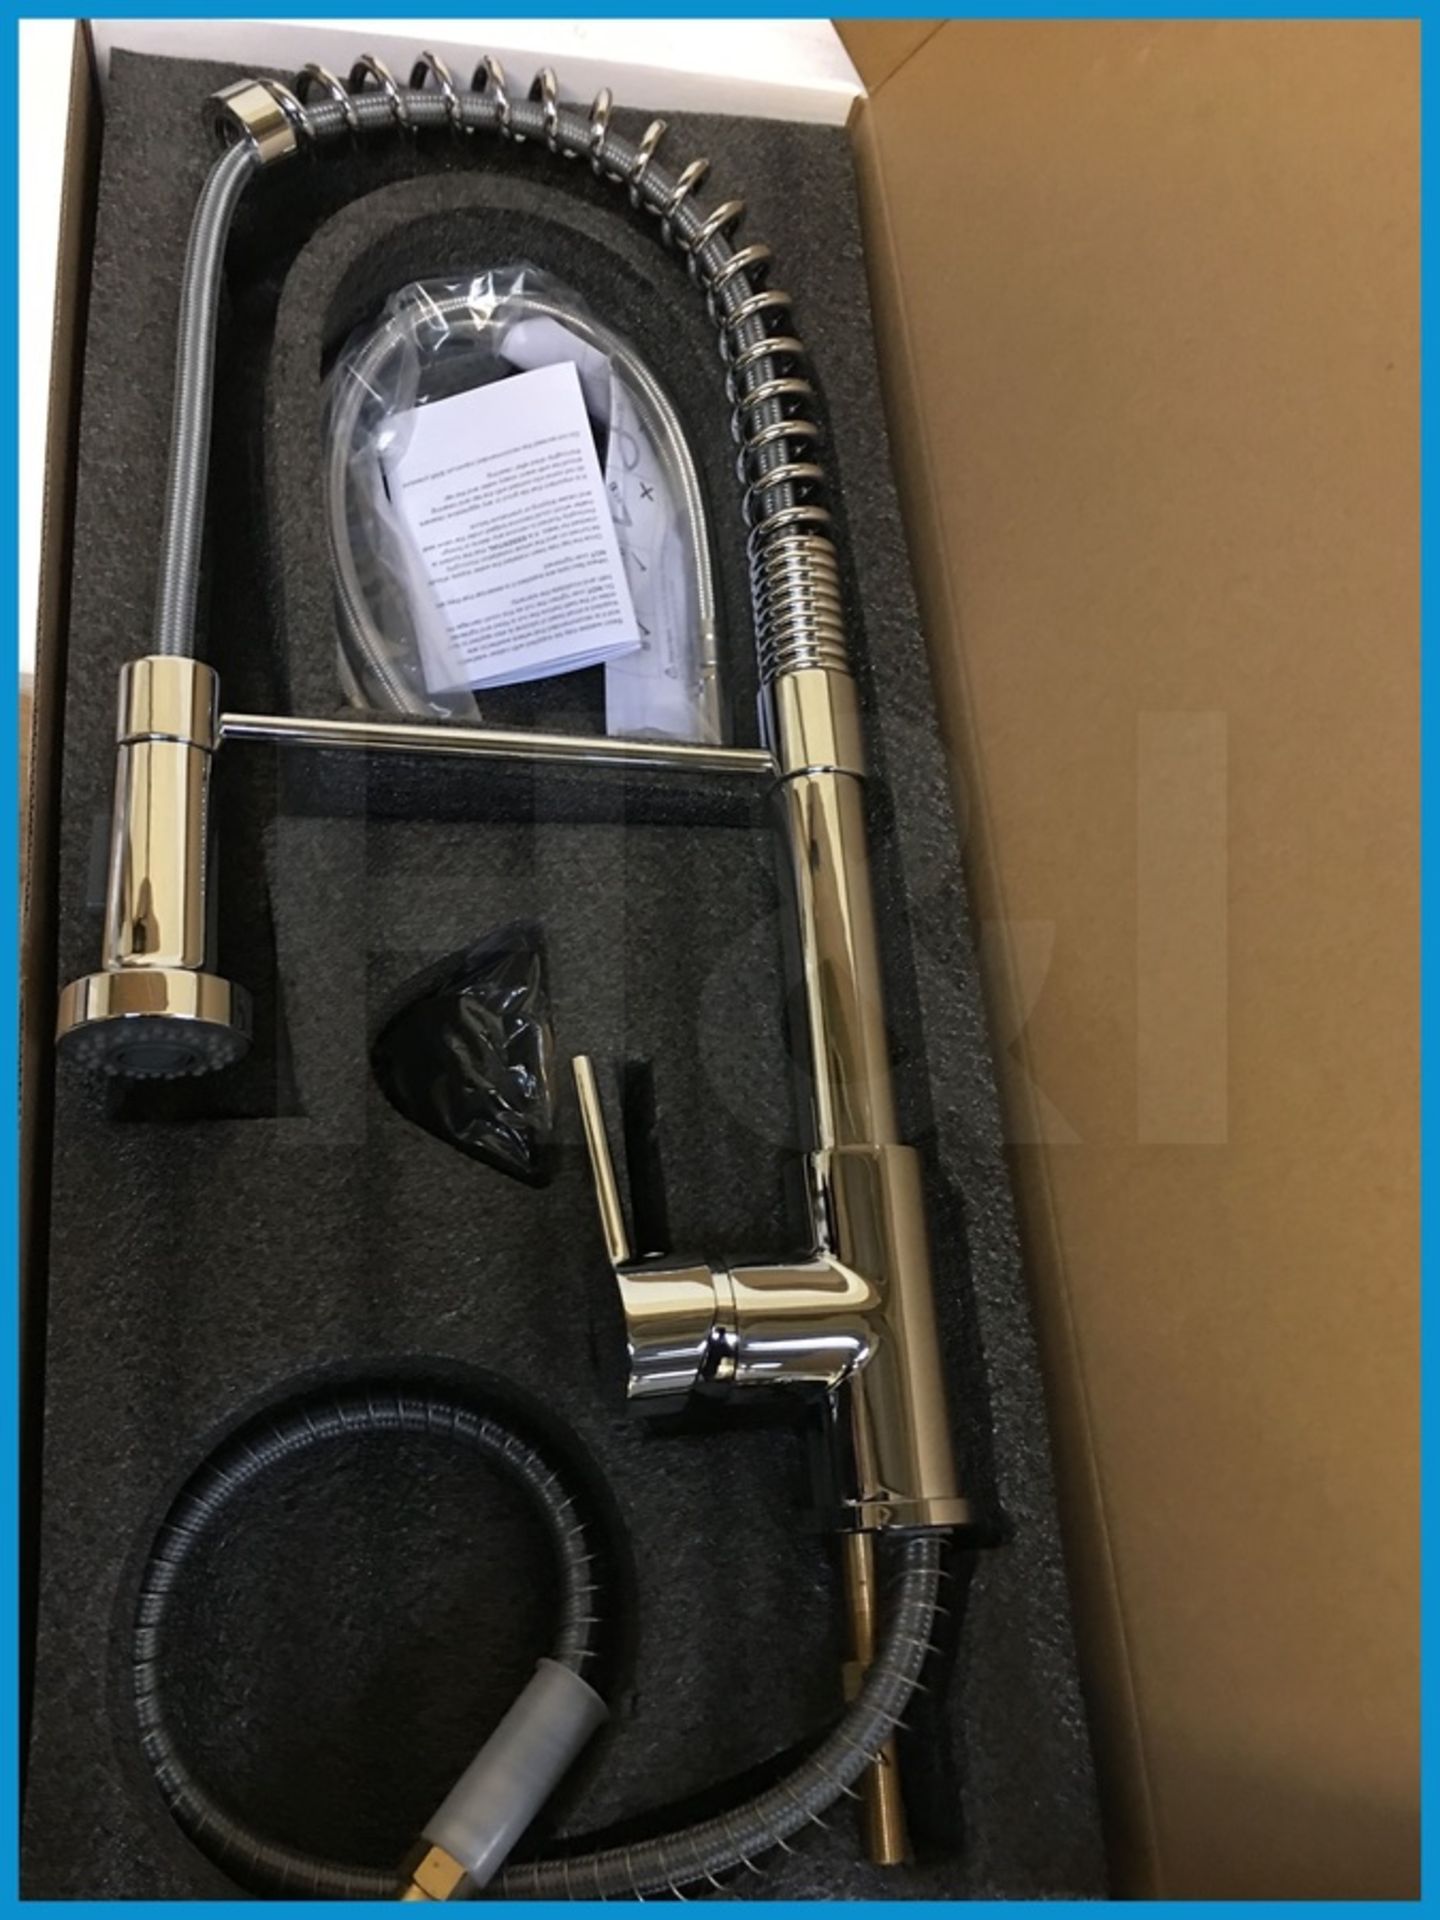 Stunning designer sprung neck kitchen mixer tap with pull down spray head in polished chrome finish.